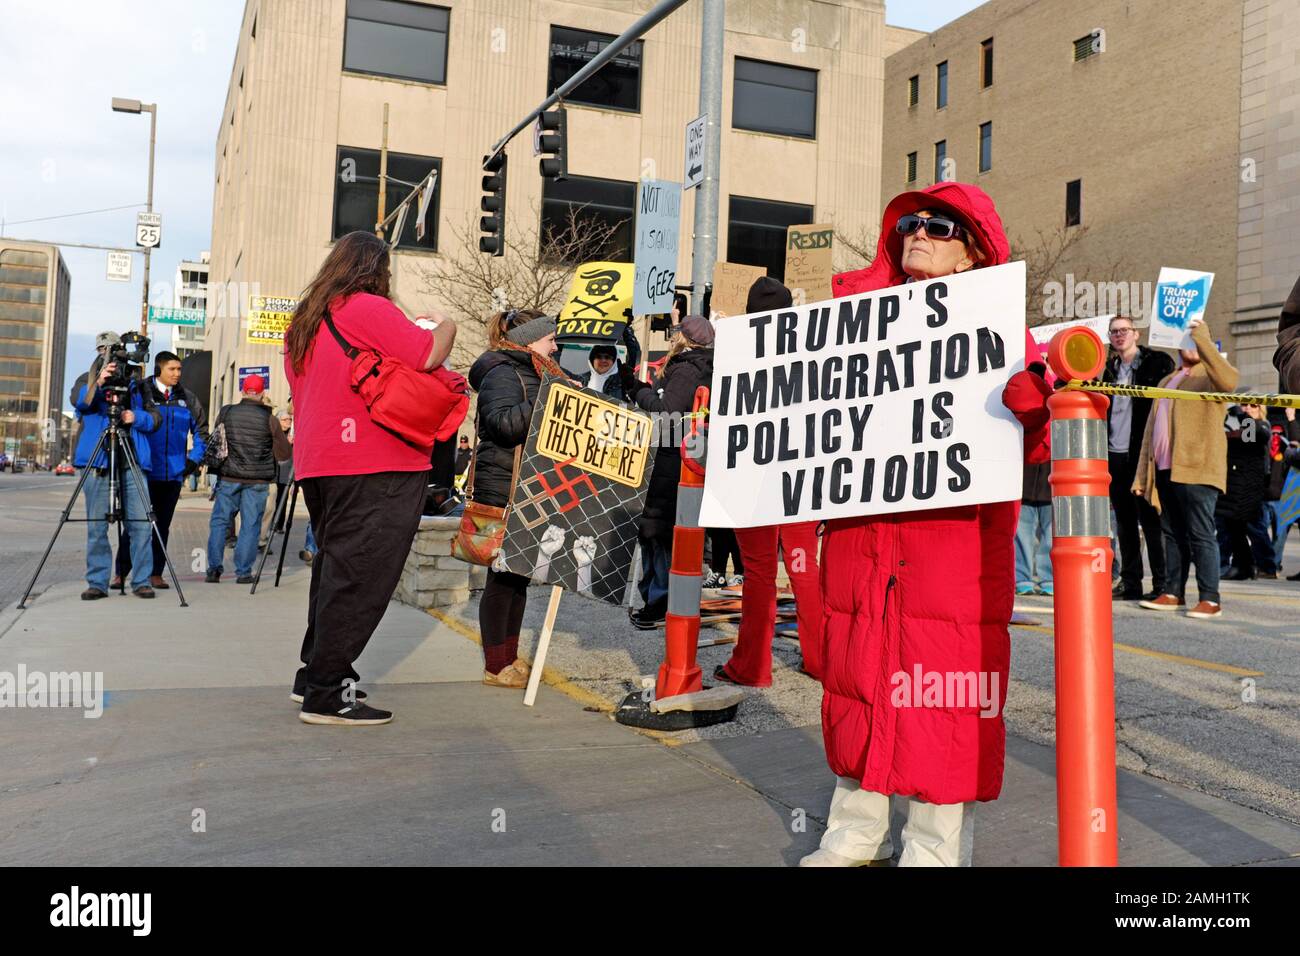 Protesting visit by Trump to downtown Toledo, Ohio, USA on January 9, 2020, with a sign stating 'Trump's immigration Policy is Vicious' Stock Photo